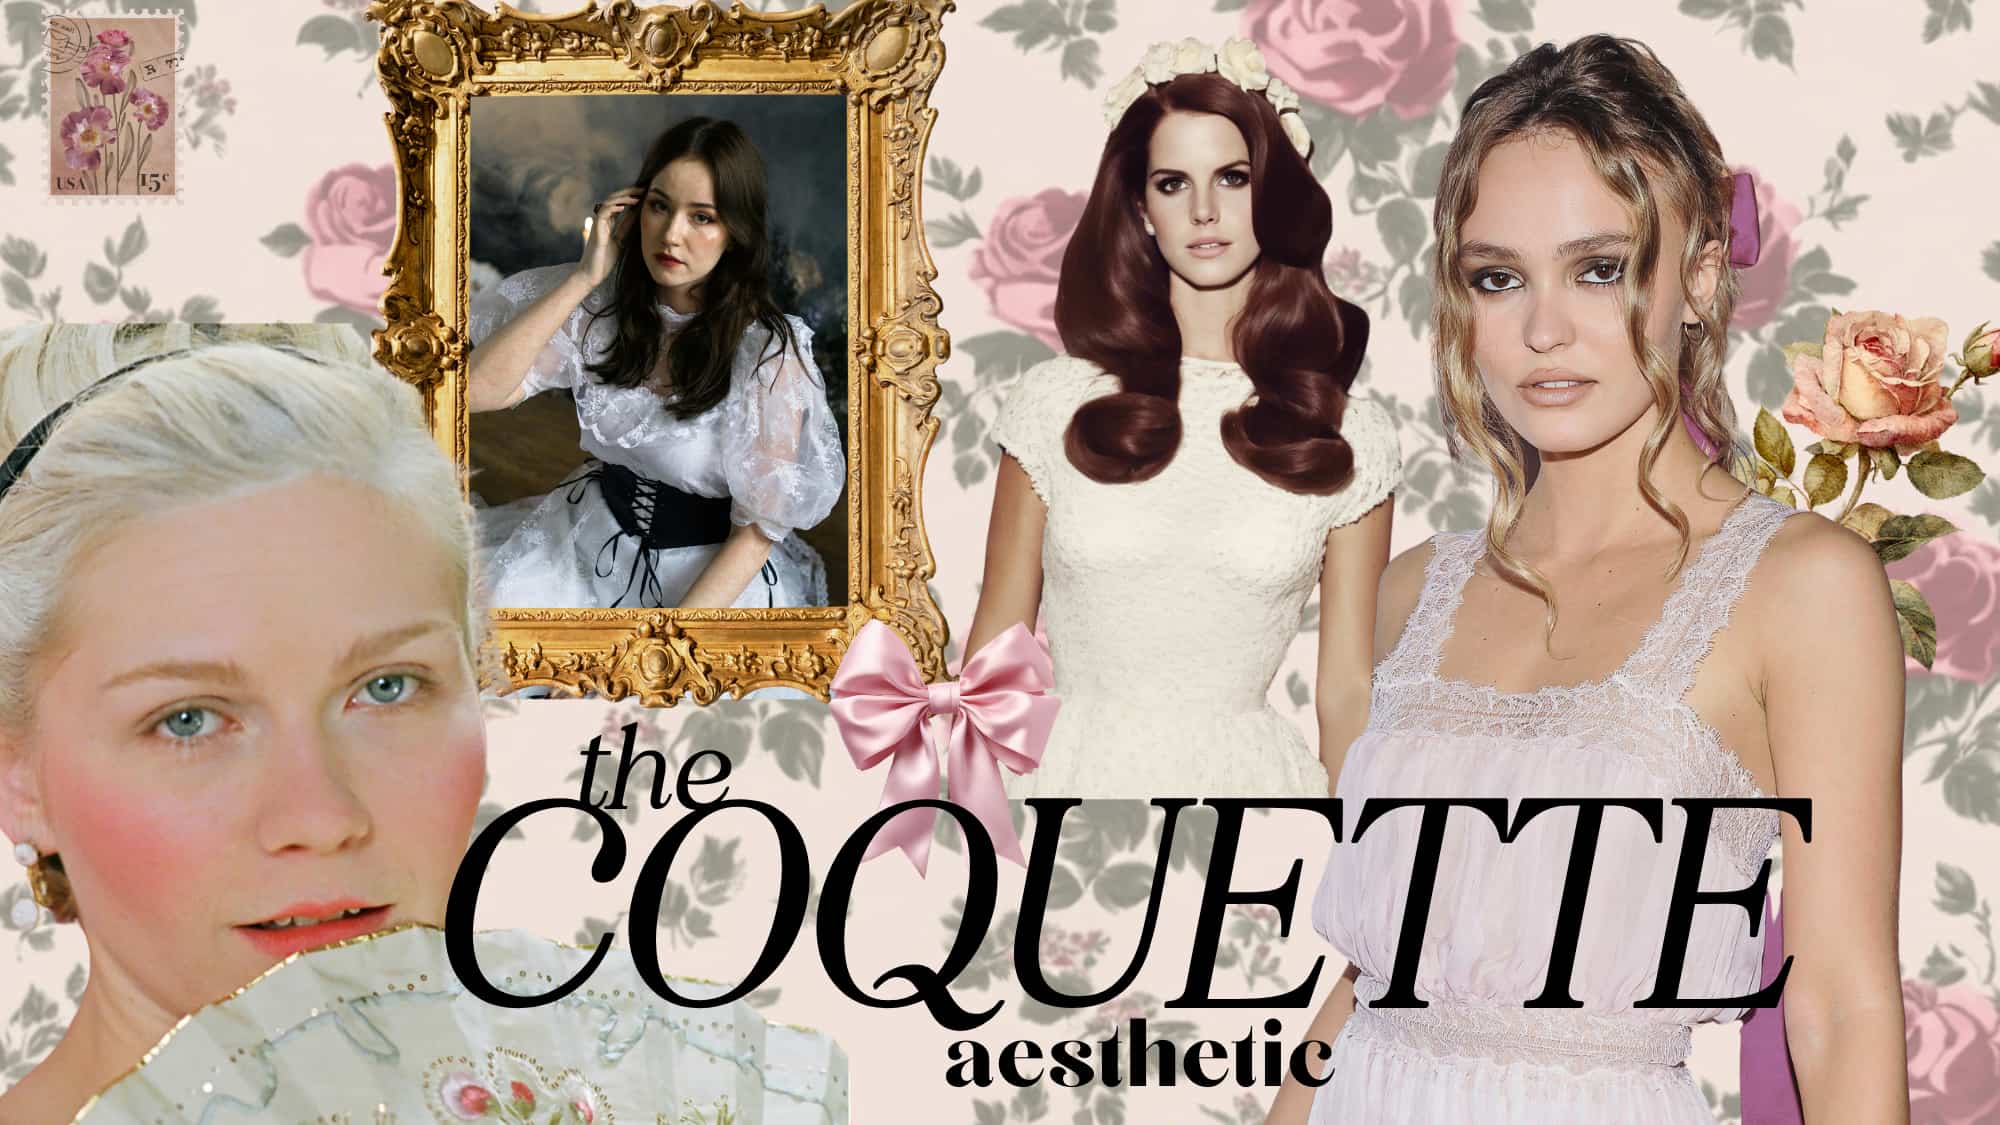 Flirting with Fashion? The Coquette Style Aestethic might just